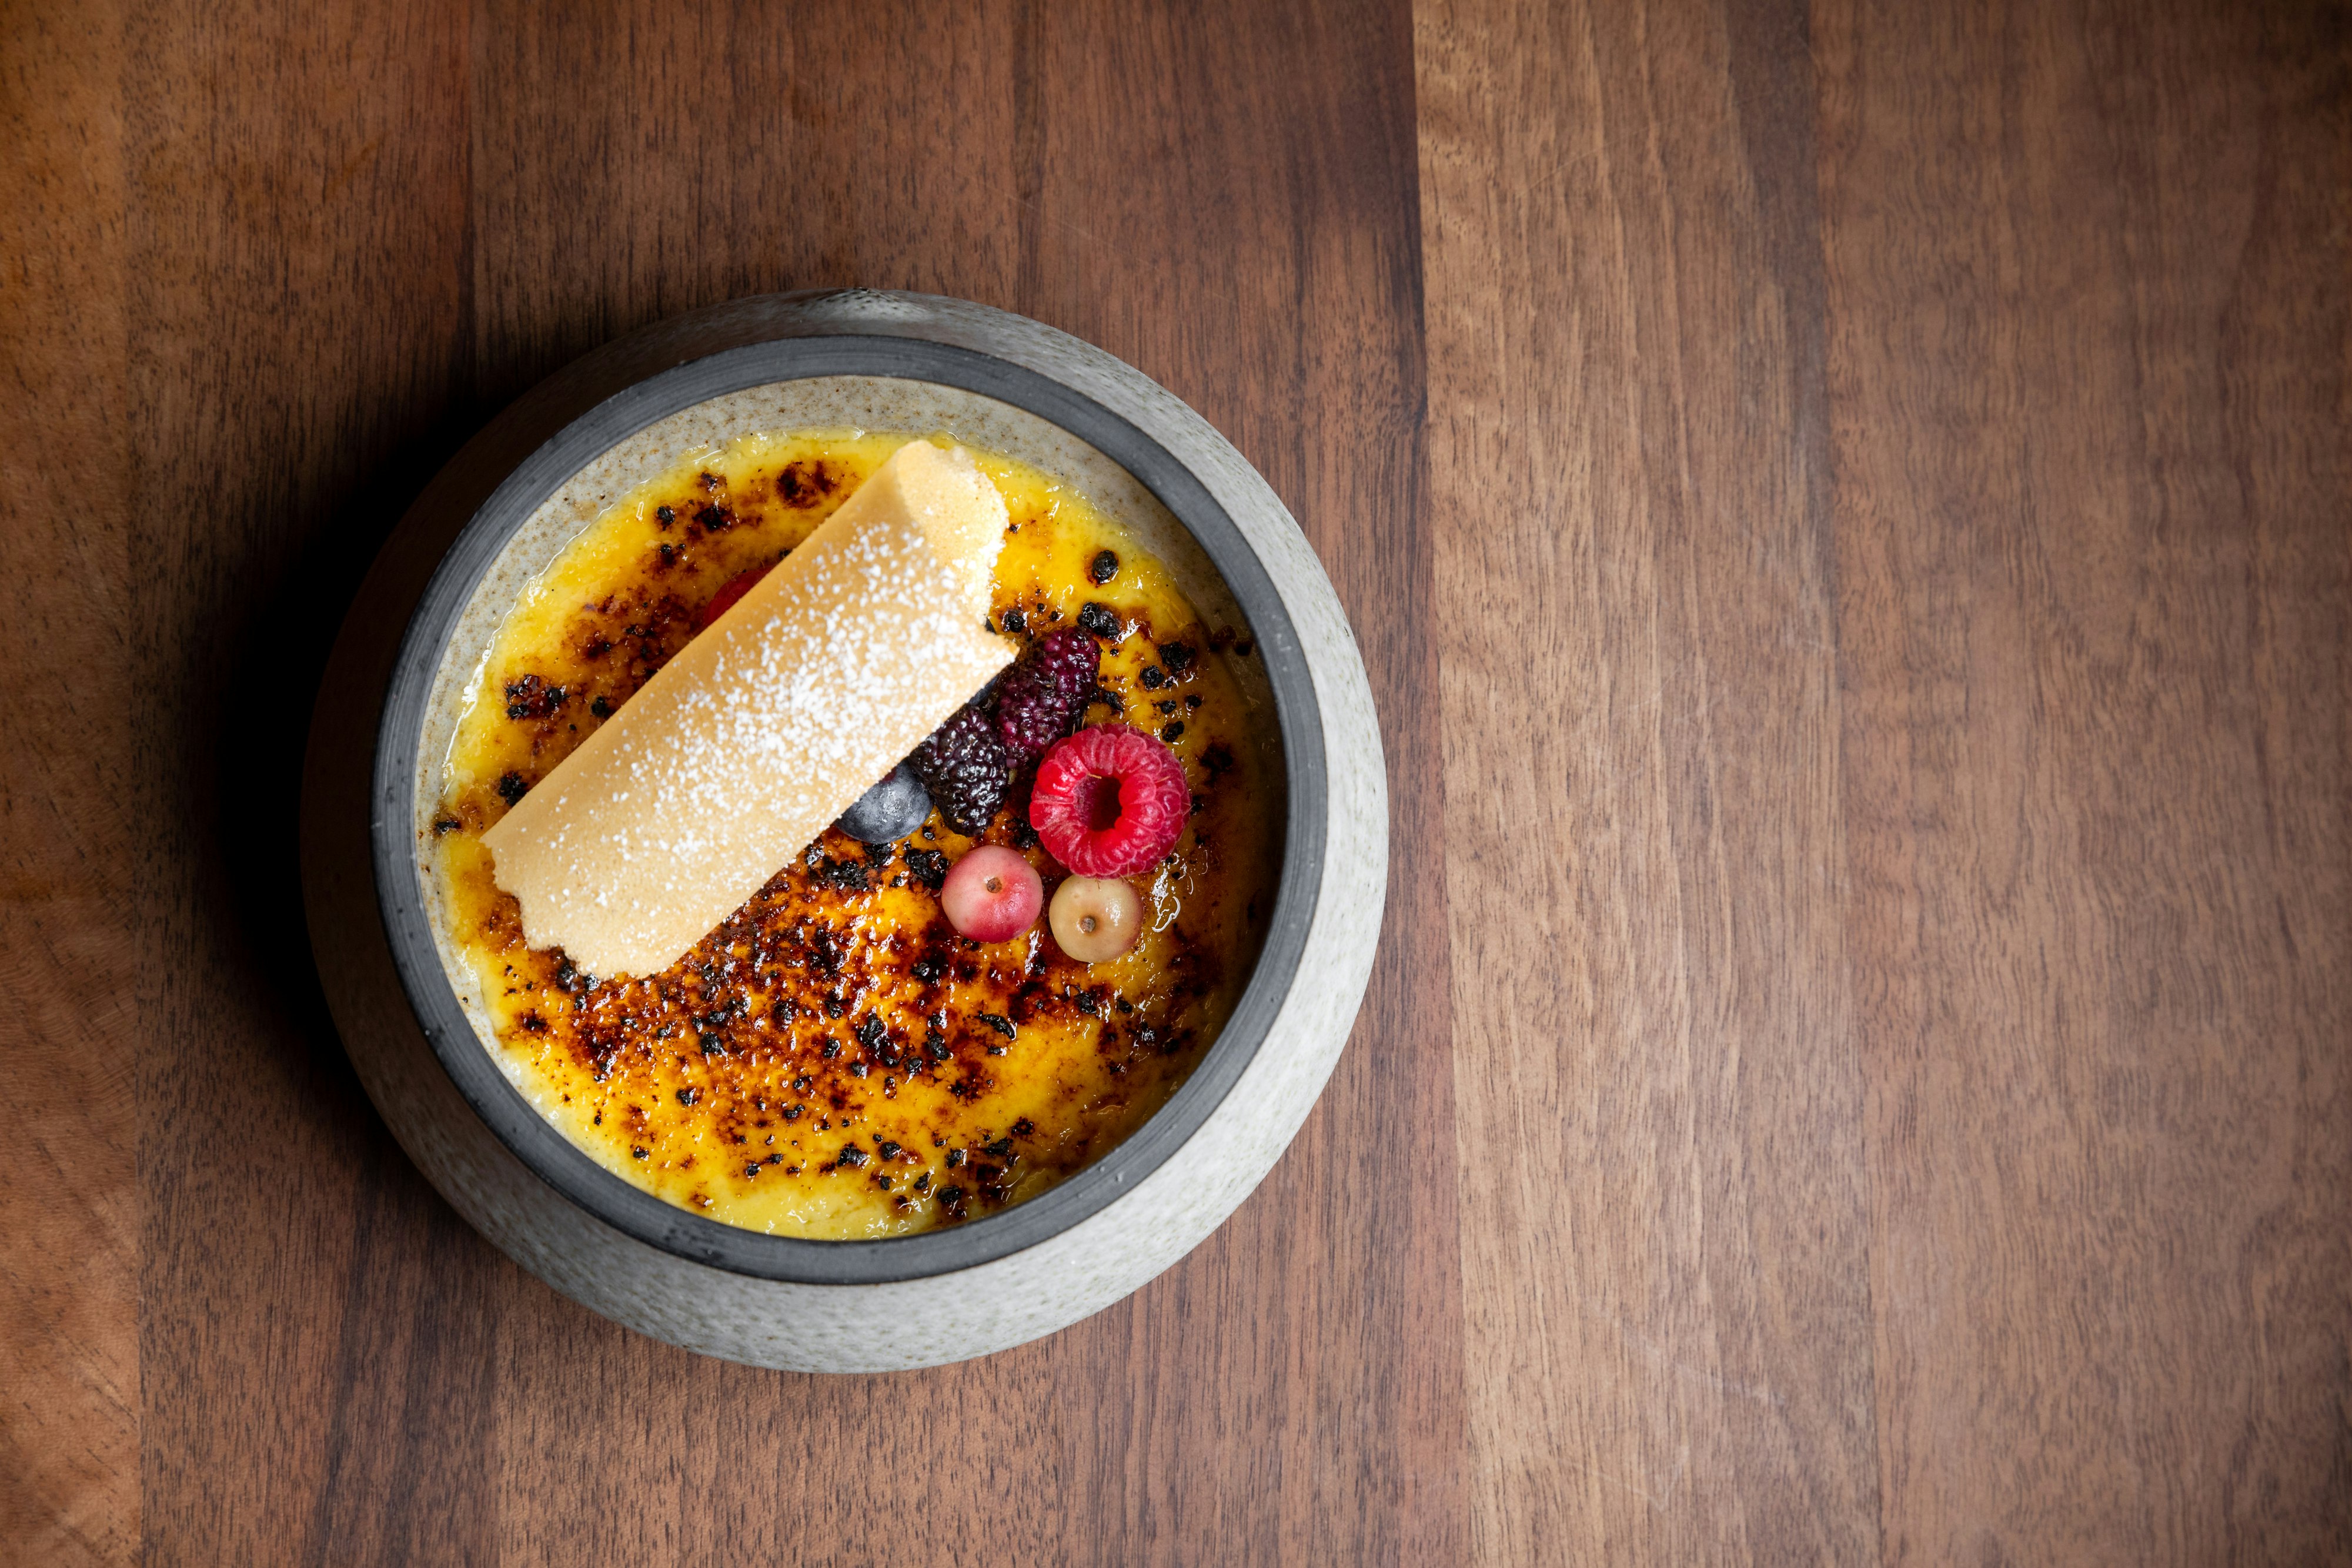 A duck egg creme brulee dish with berry topping and flecks of powdered sugar